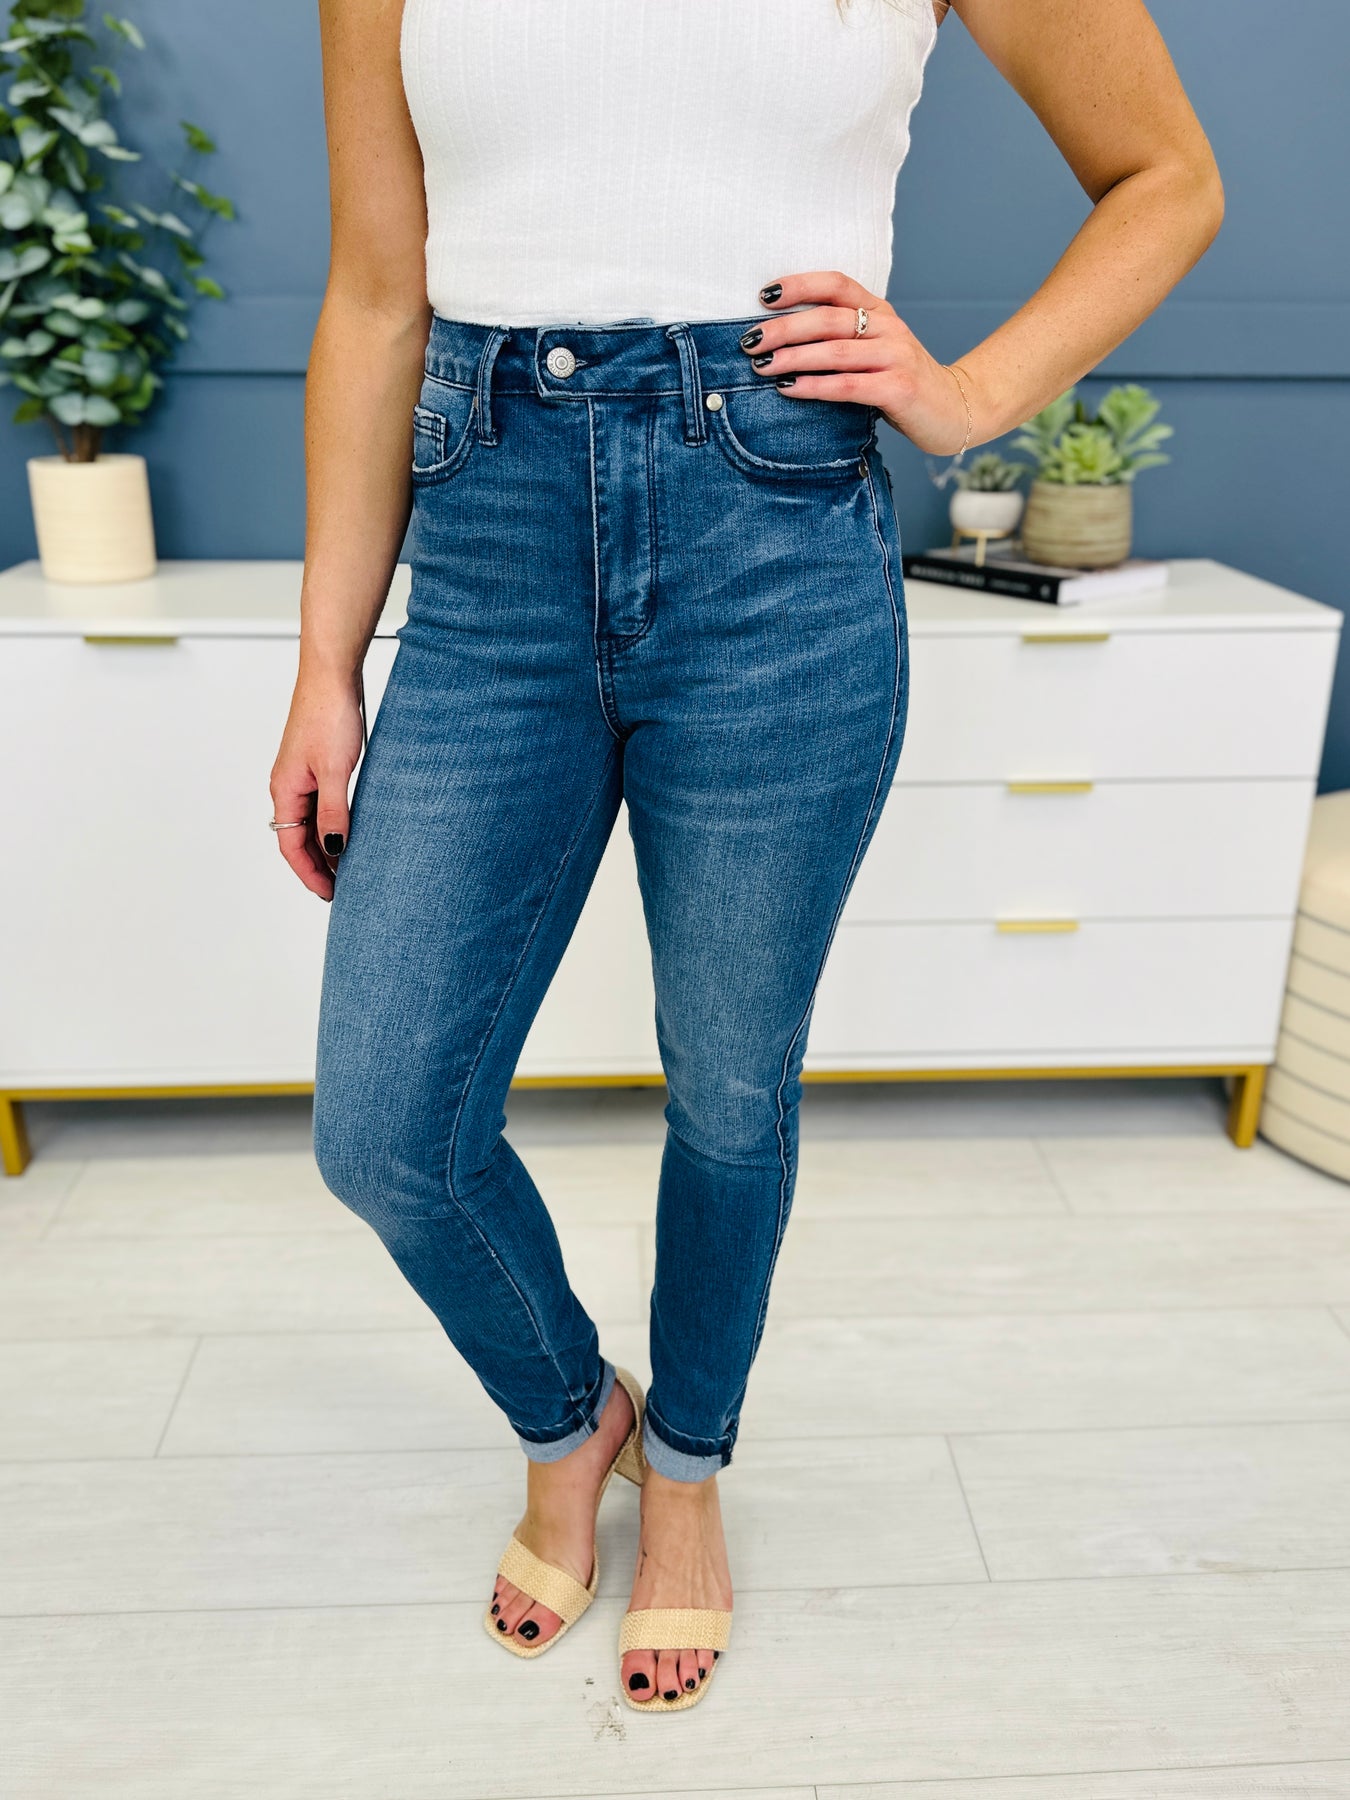 NEW RELEASE: Judy Blue The Backup Plan Tummy Control Jeans